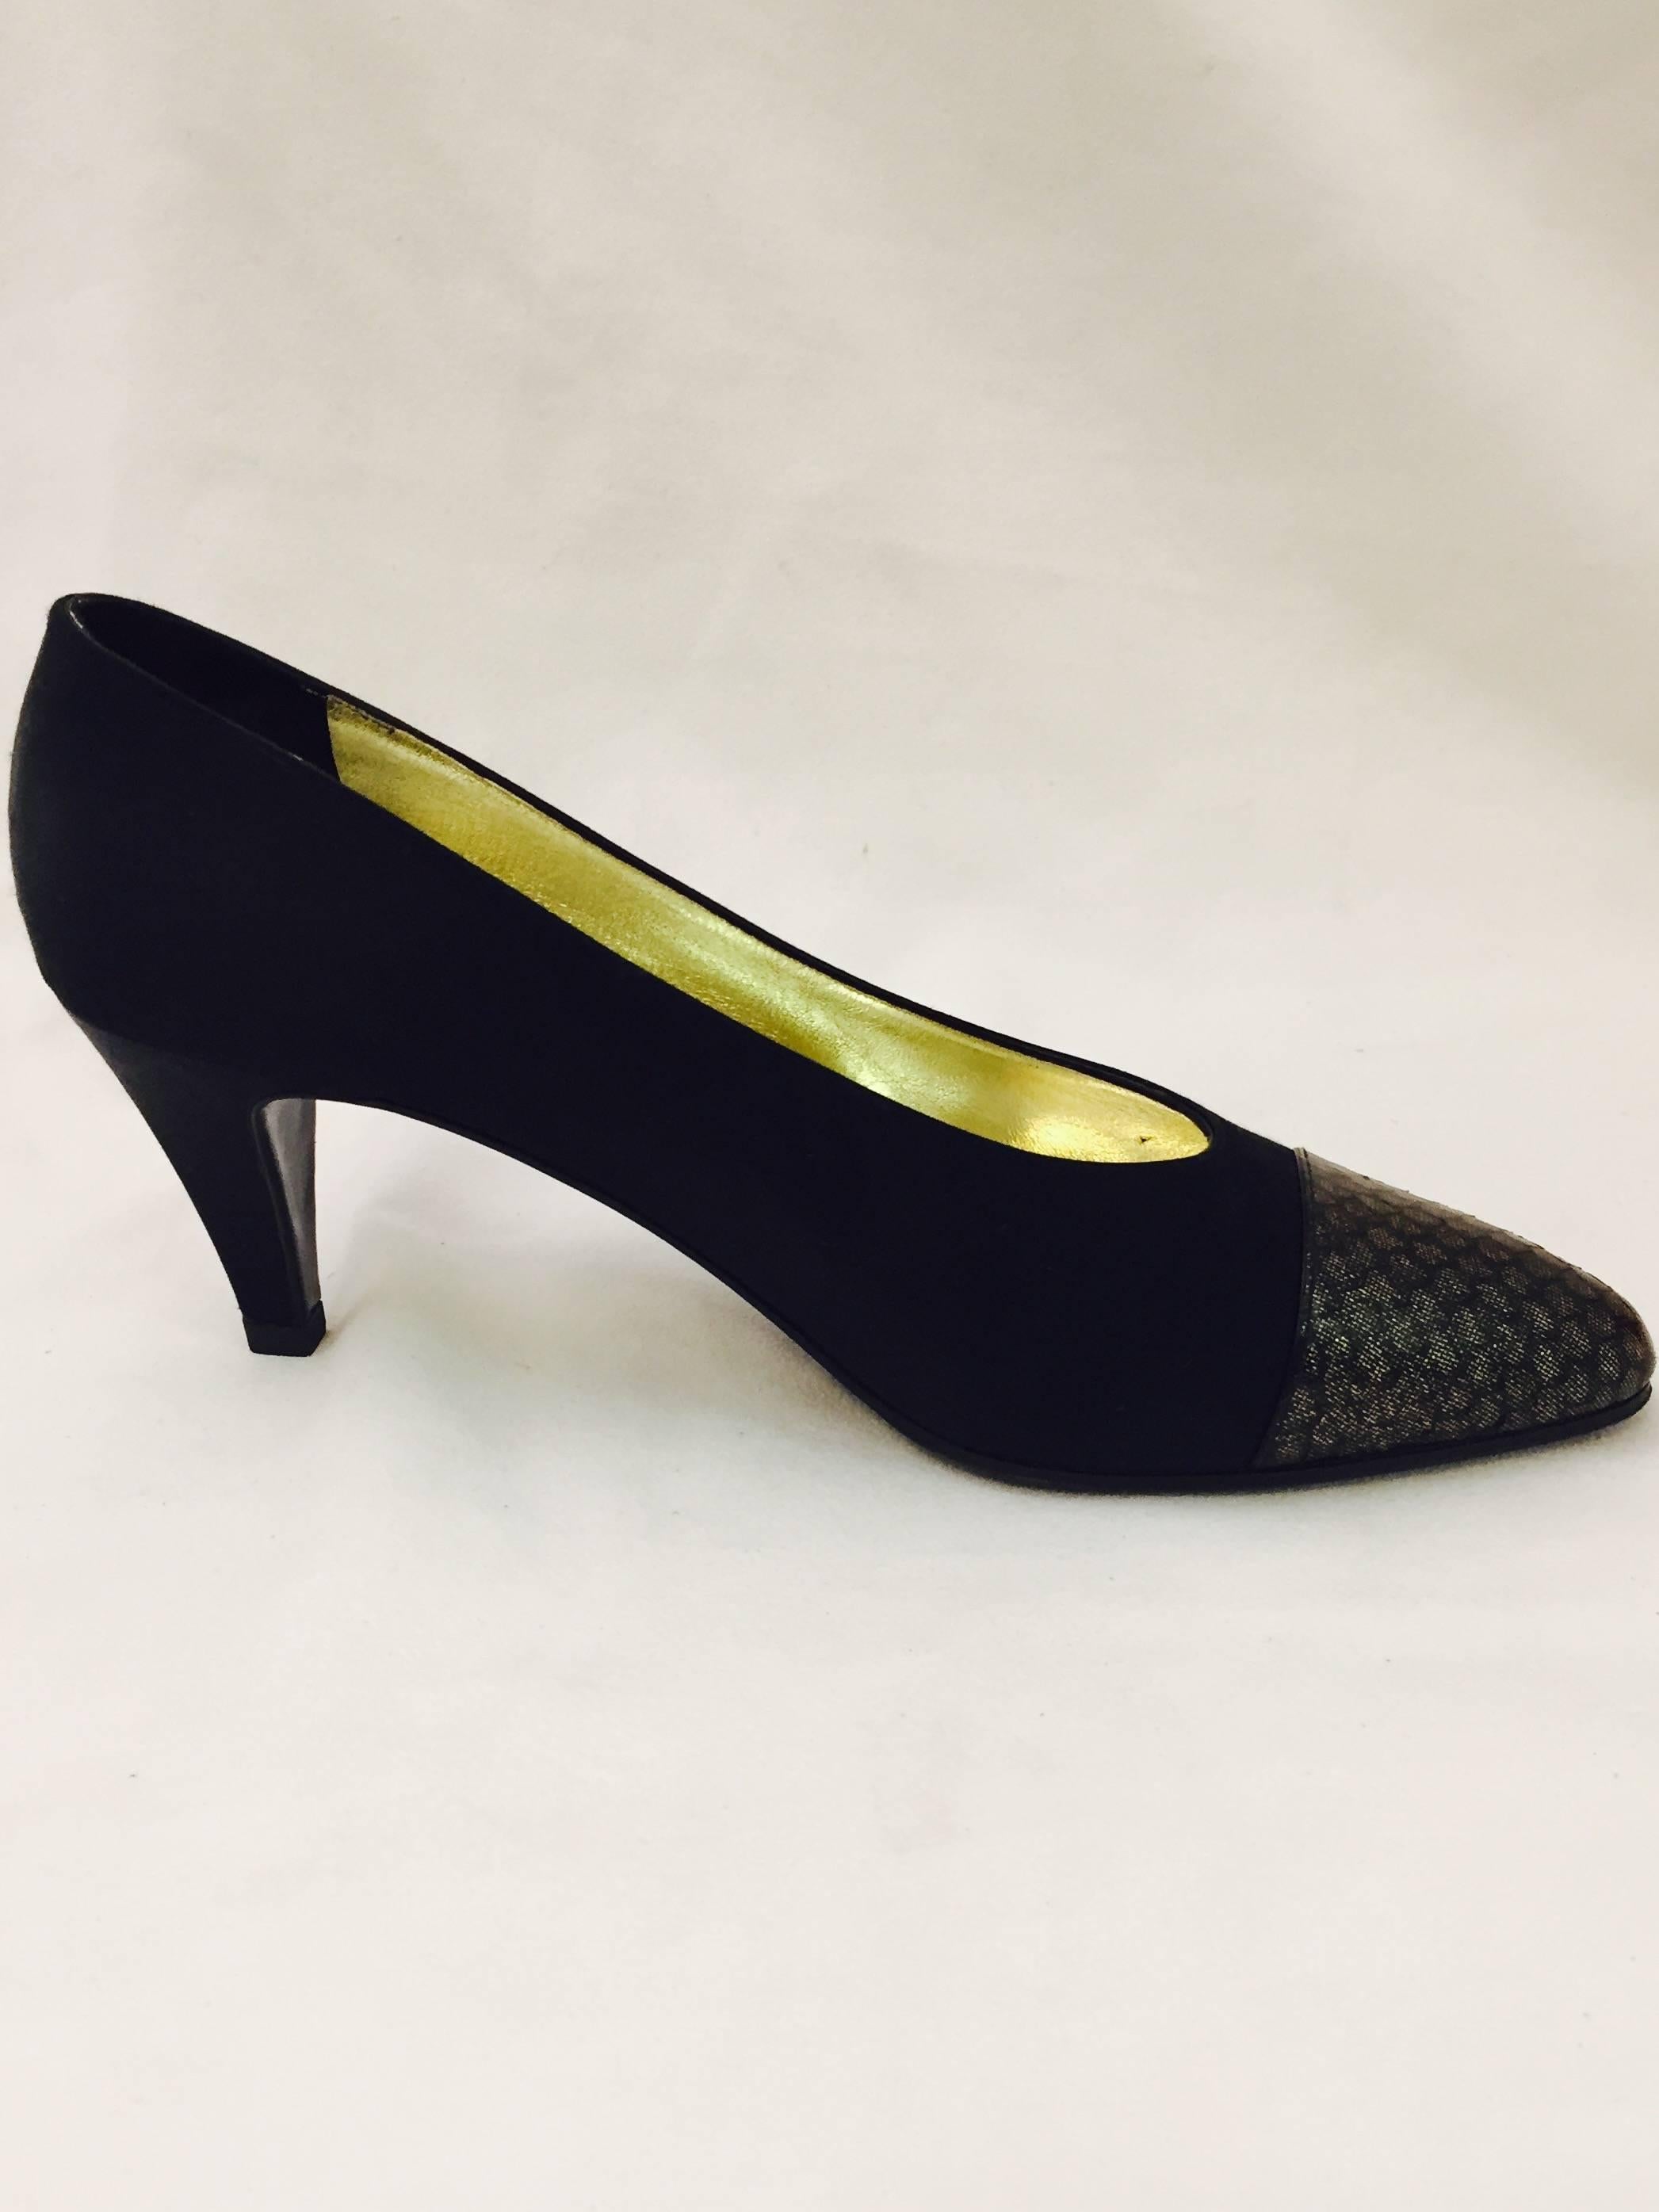 Women's Charismatic Chanel's Black Satin Pumps With Cap Toe in Gold and Black